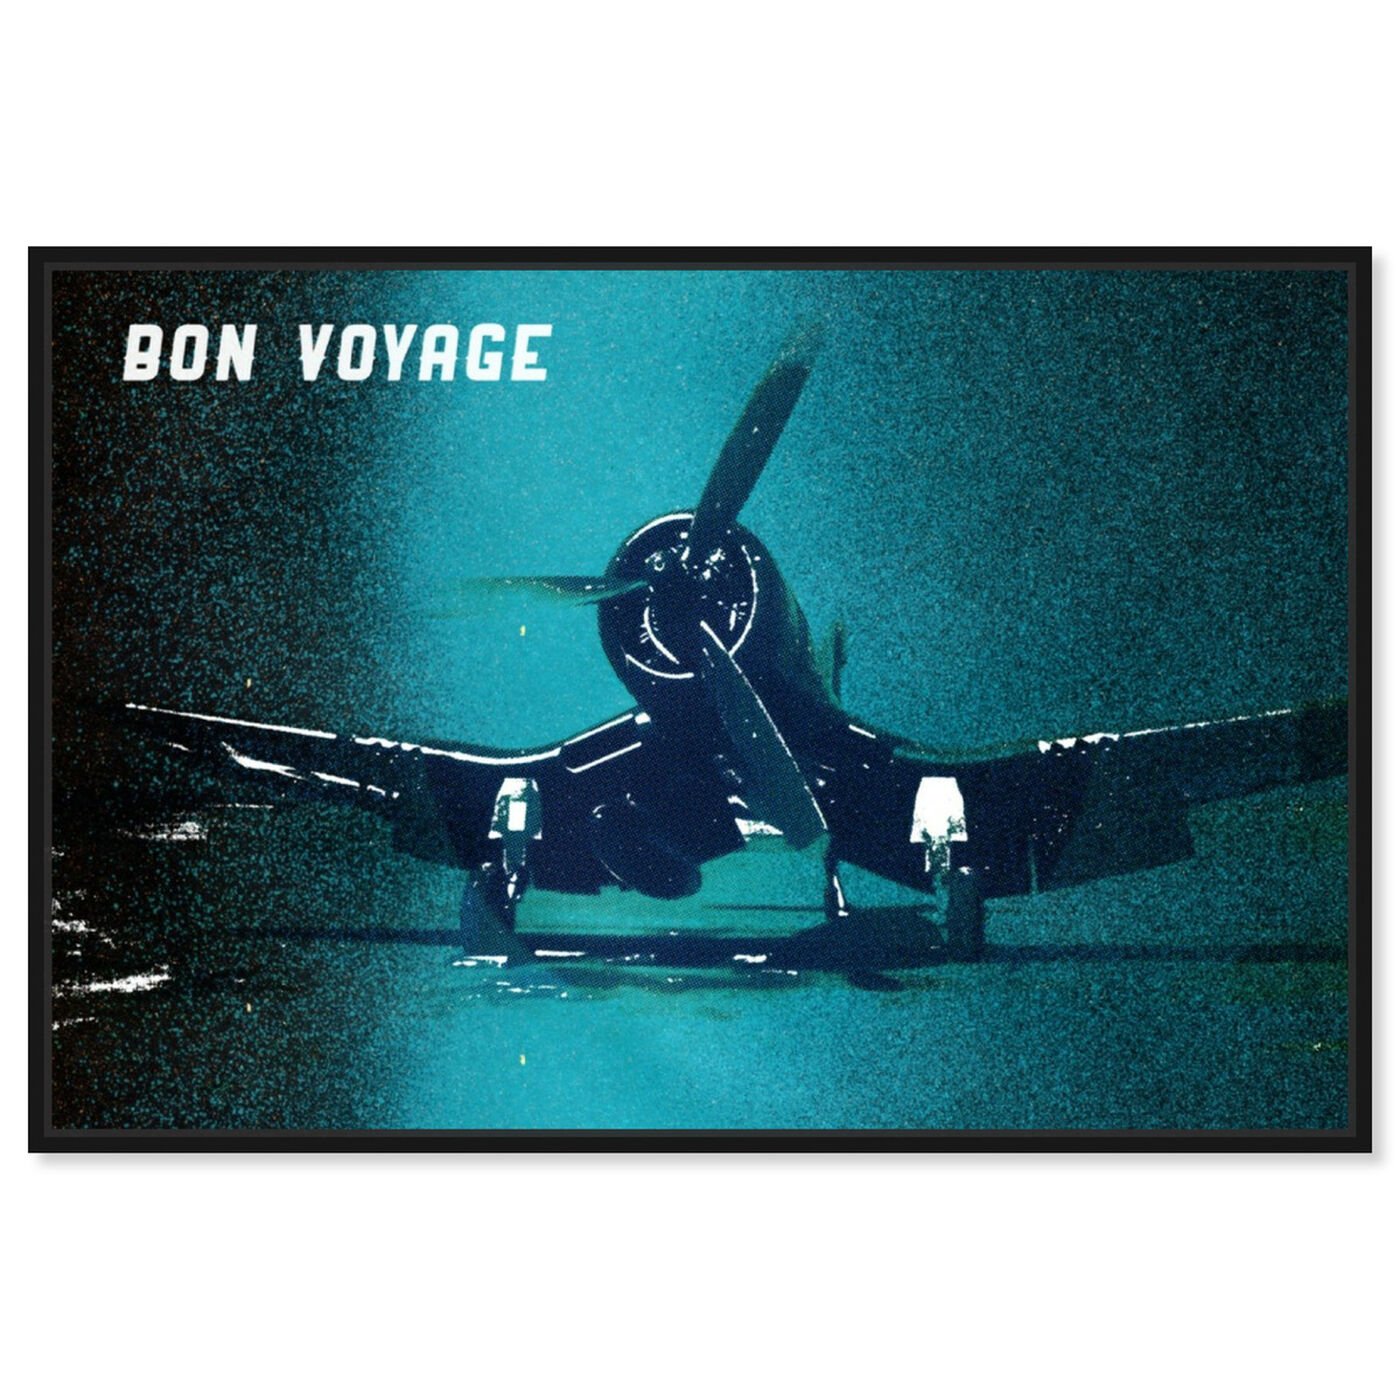 Front view of Bon Voyage featuring transportation and airplanes art.